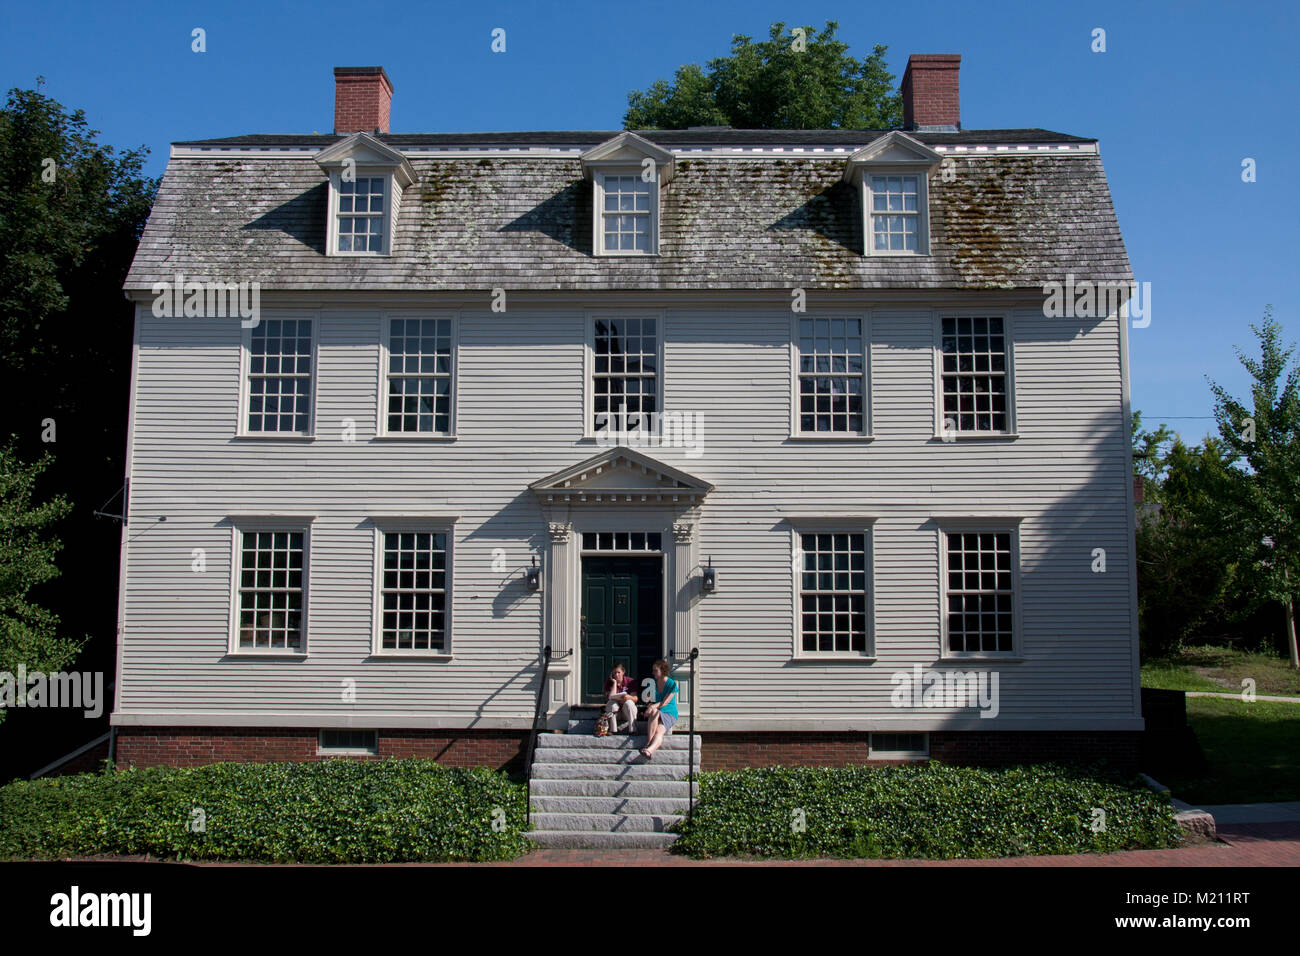 Portsmouth New Hampshire: Strawbery Banke Museum at Puddle Dock, Gov. Goodwin Mansion and gardens Stock Photo